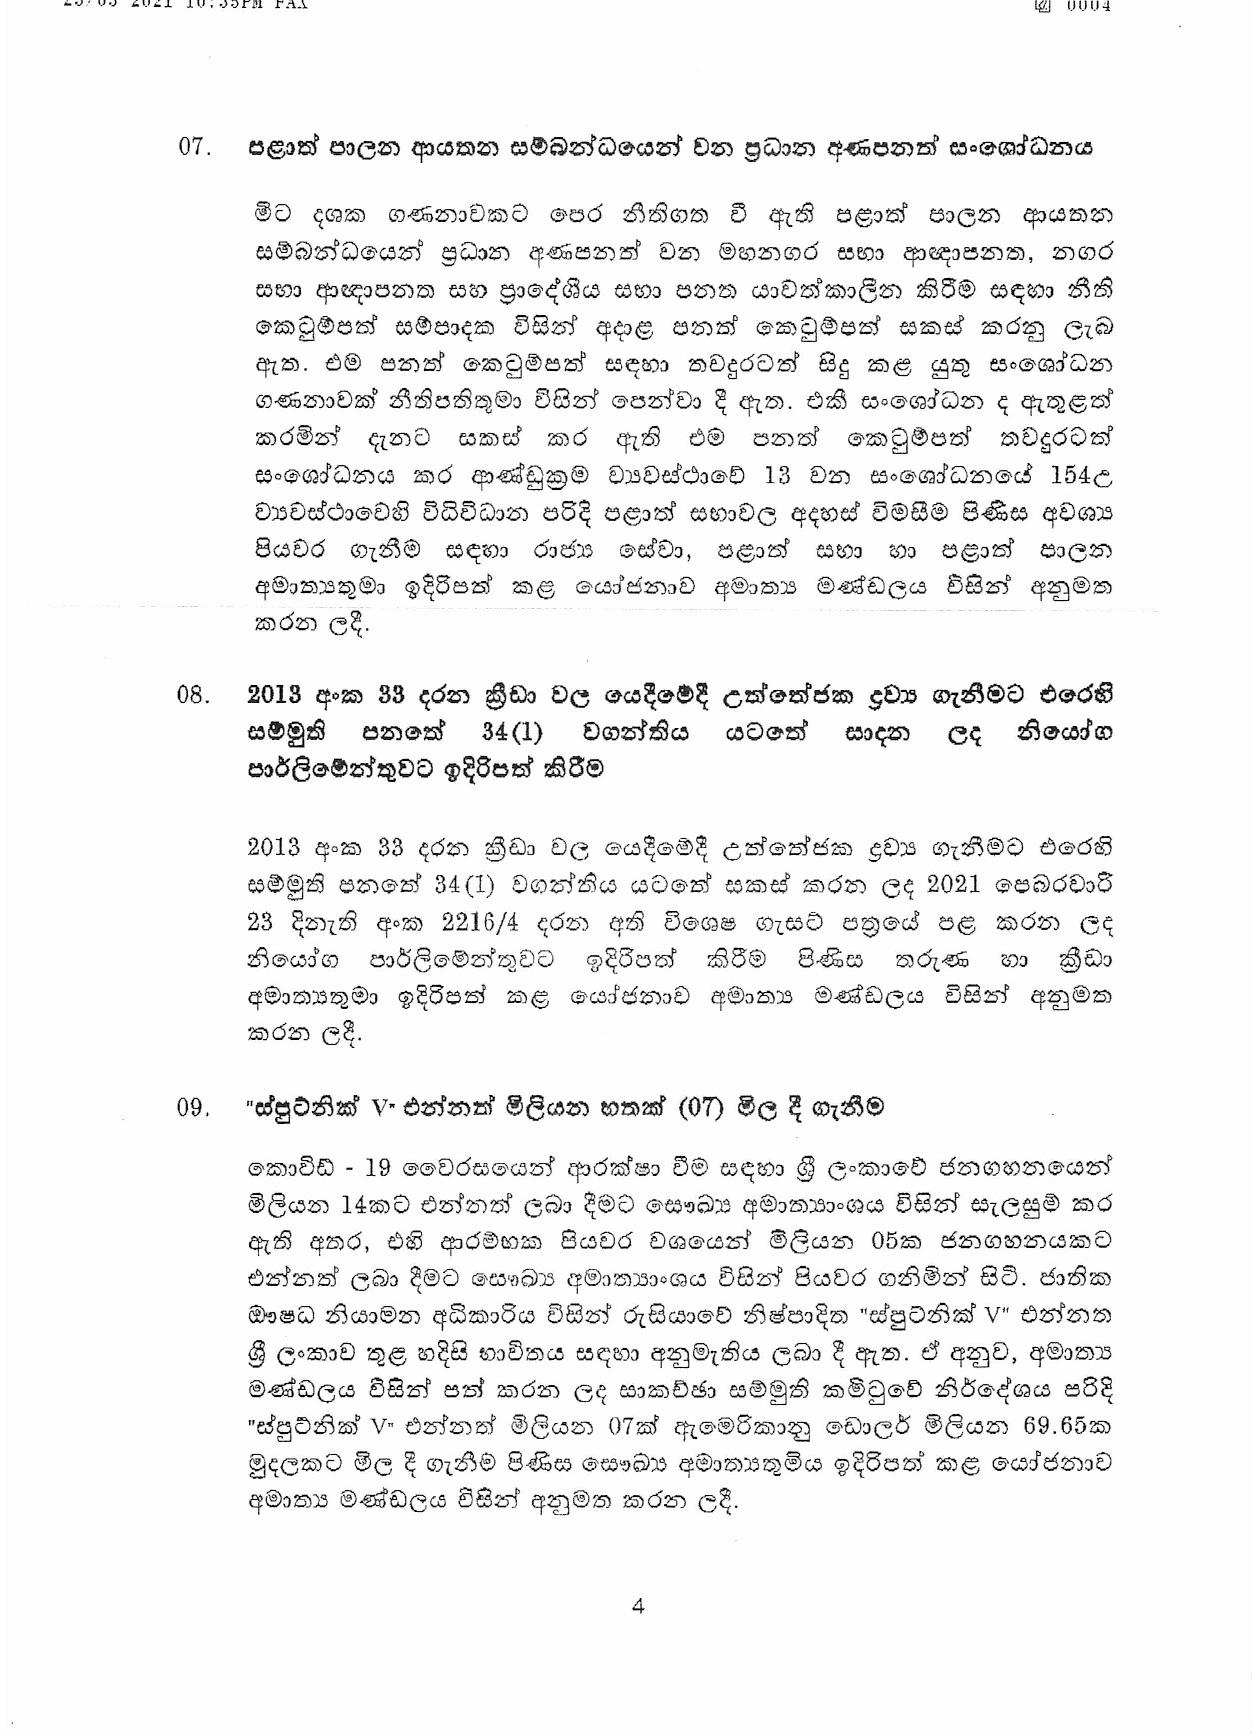 Cabinet Decision on 23.03.2021 page 004